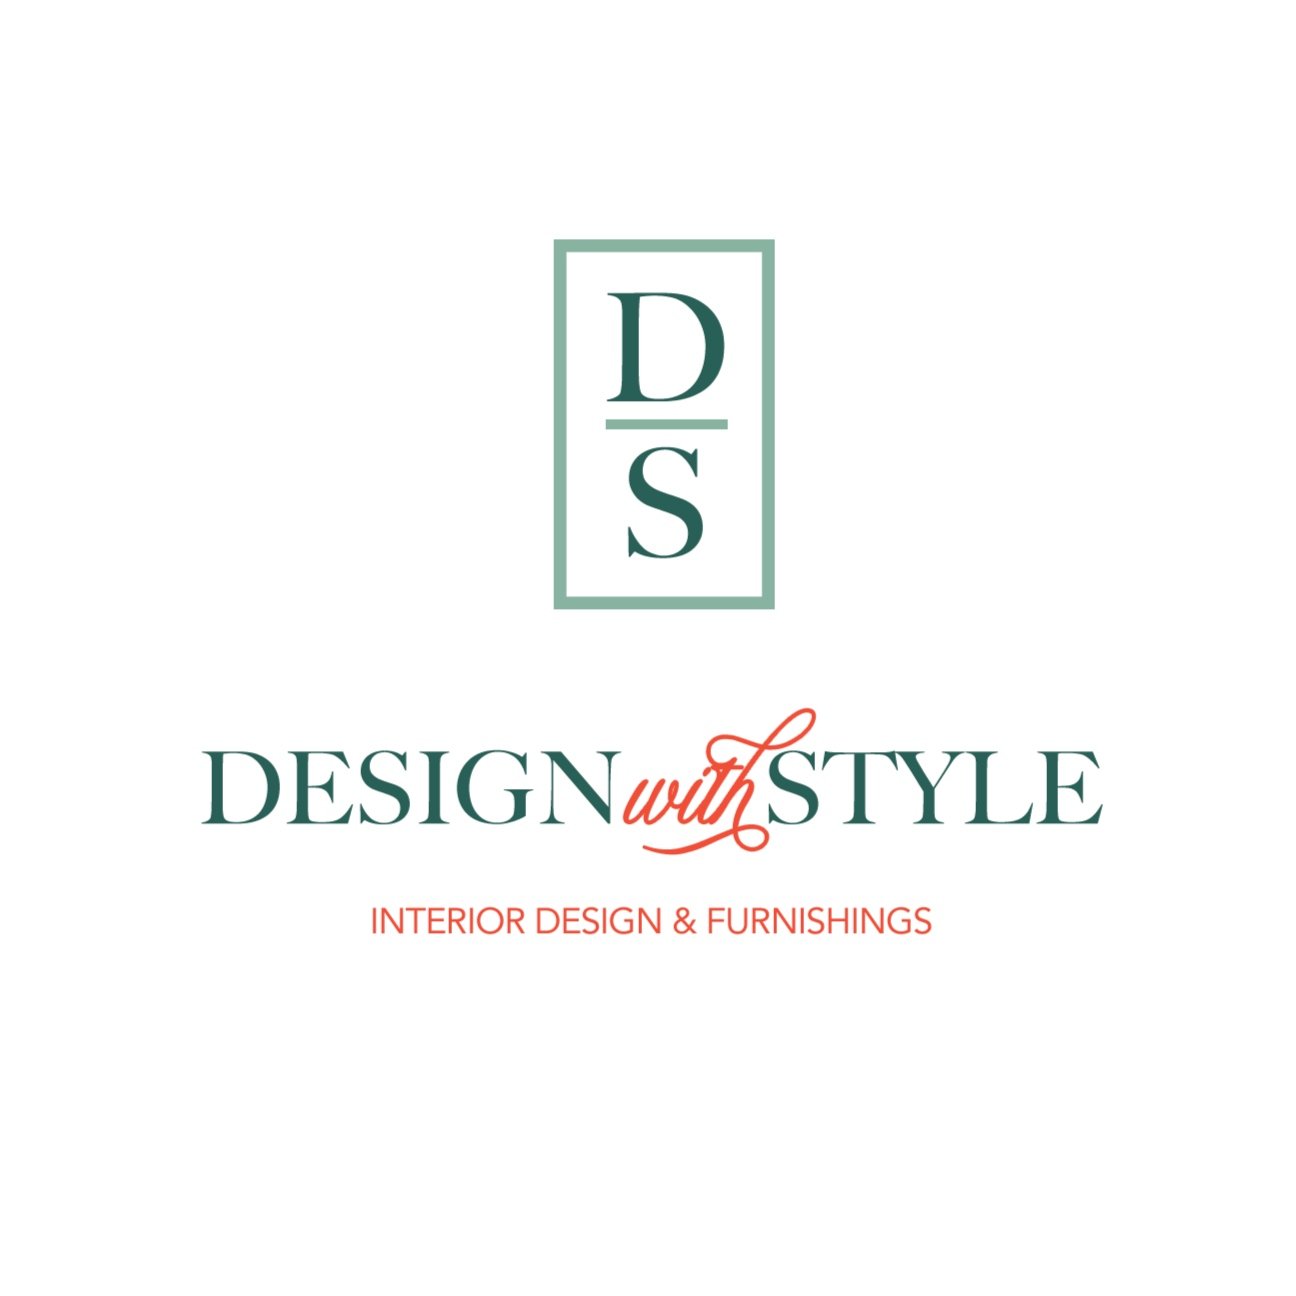 Design with Style